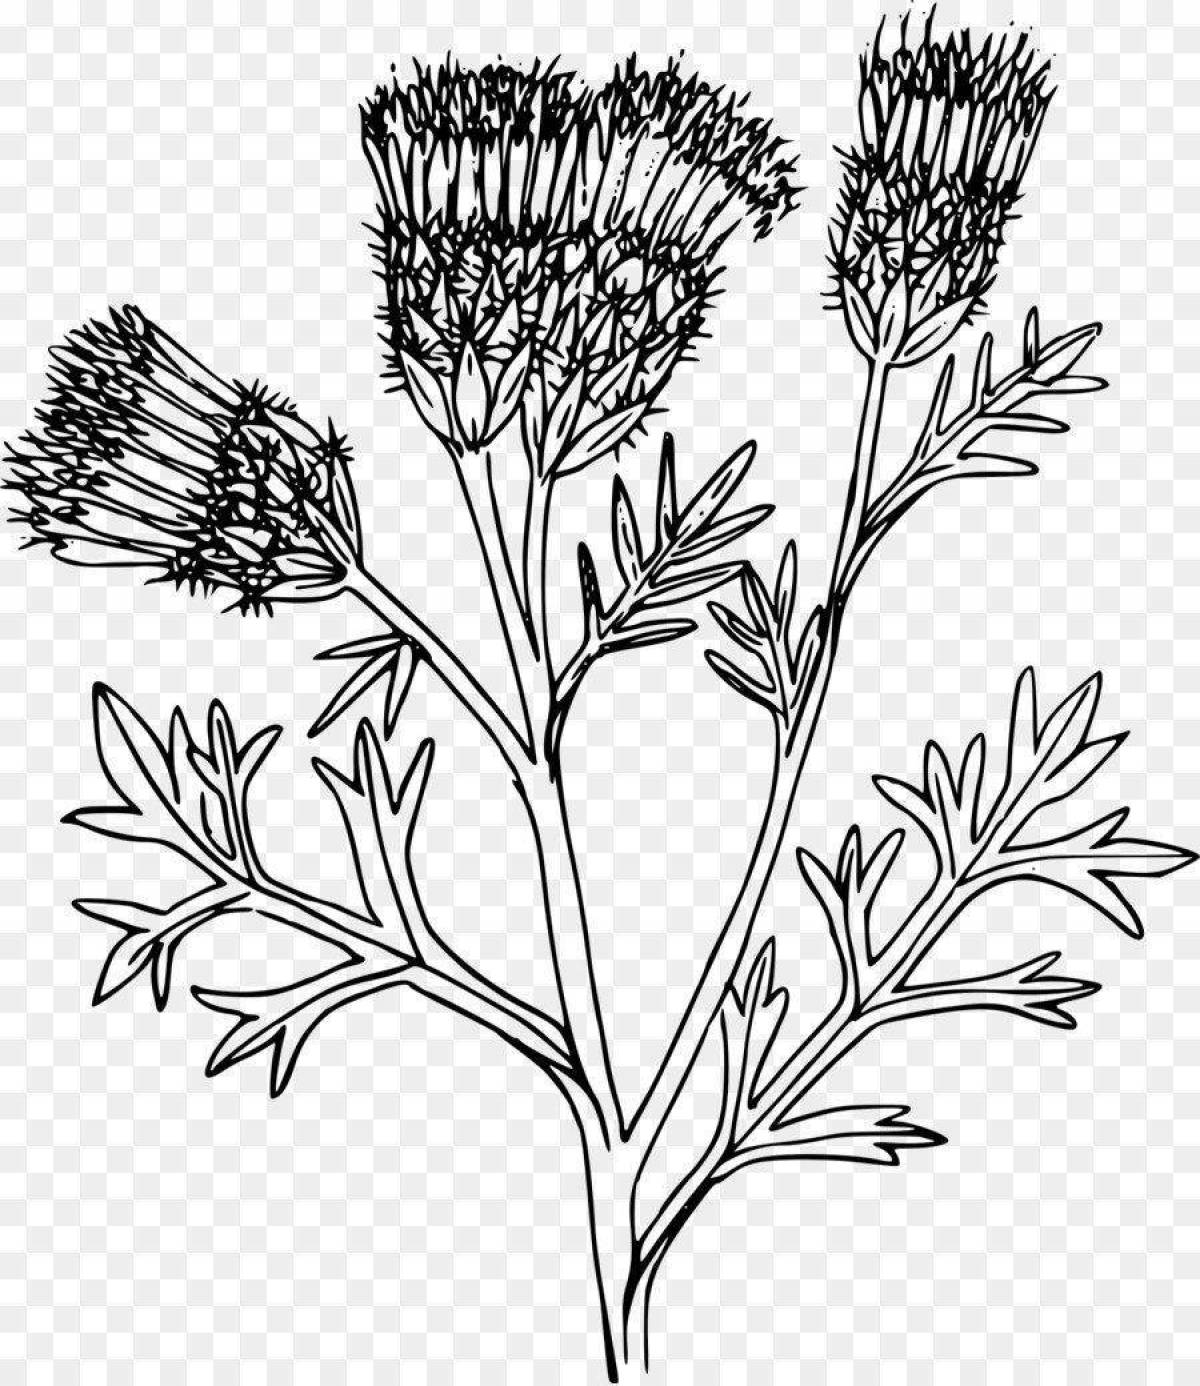 Cute thistle coloring book